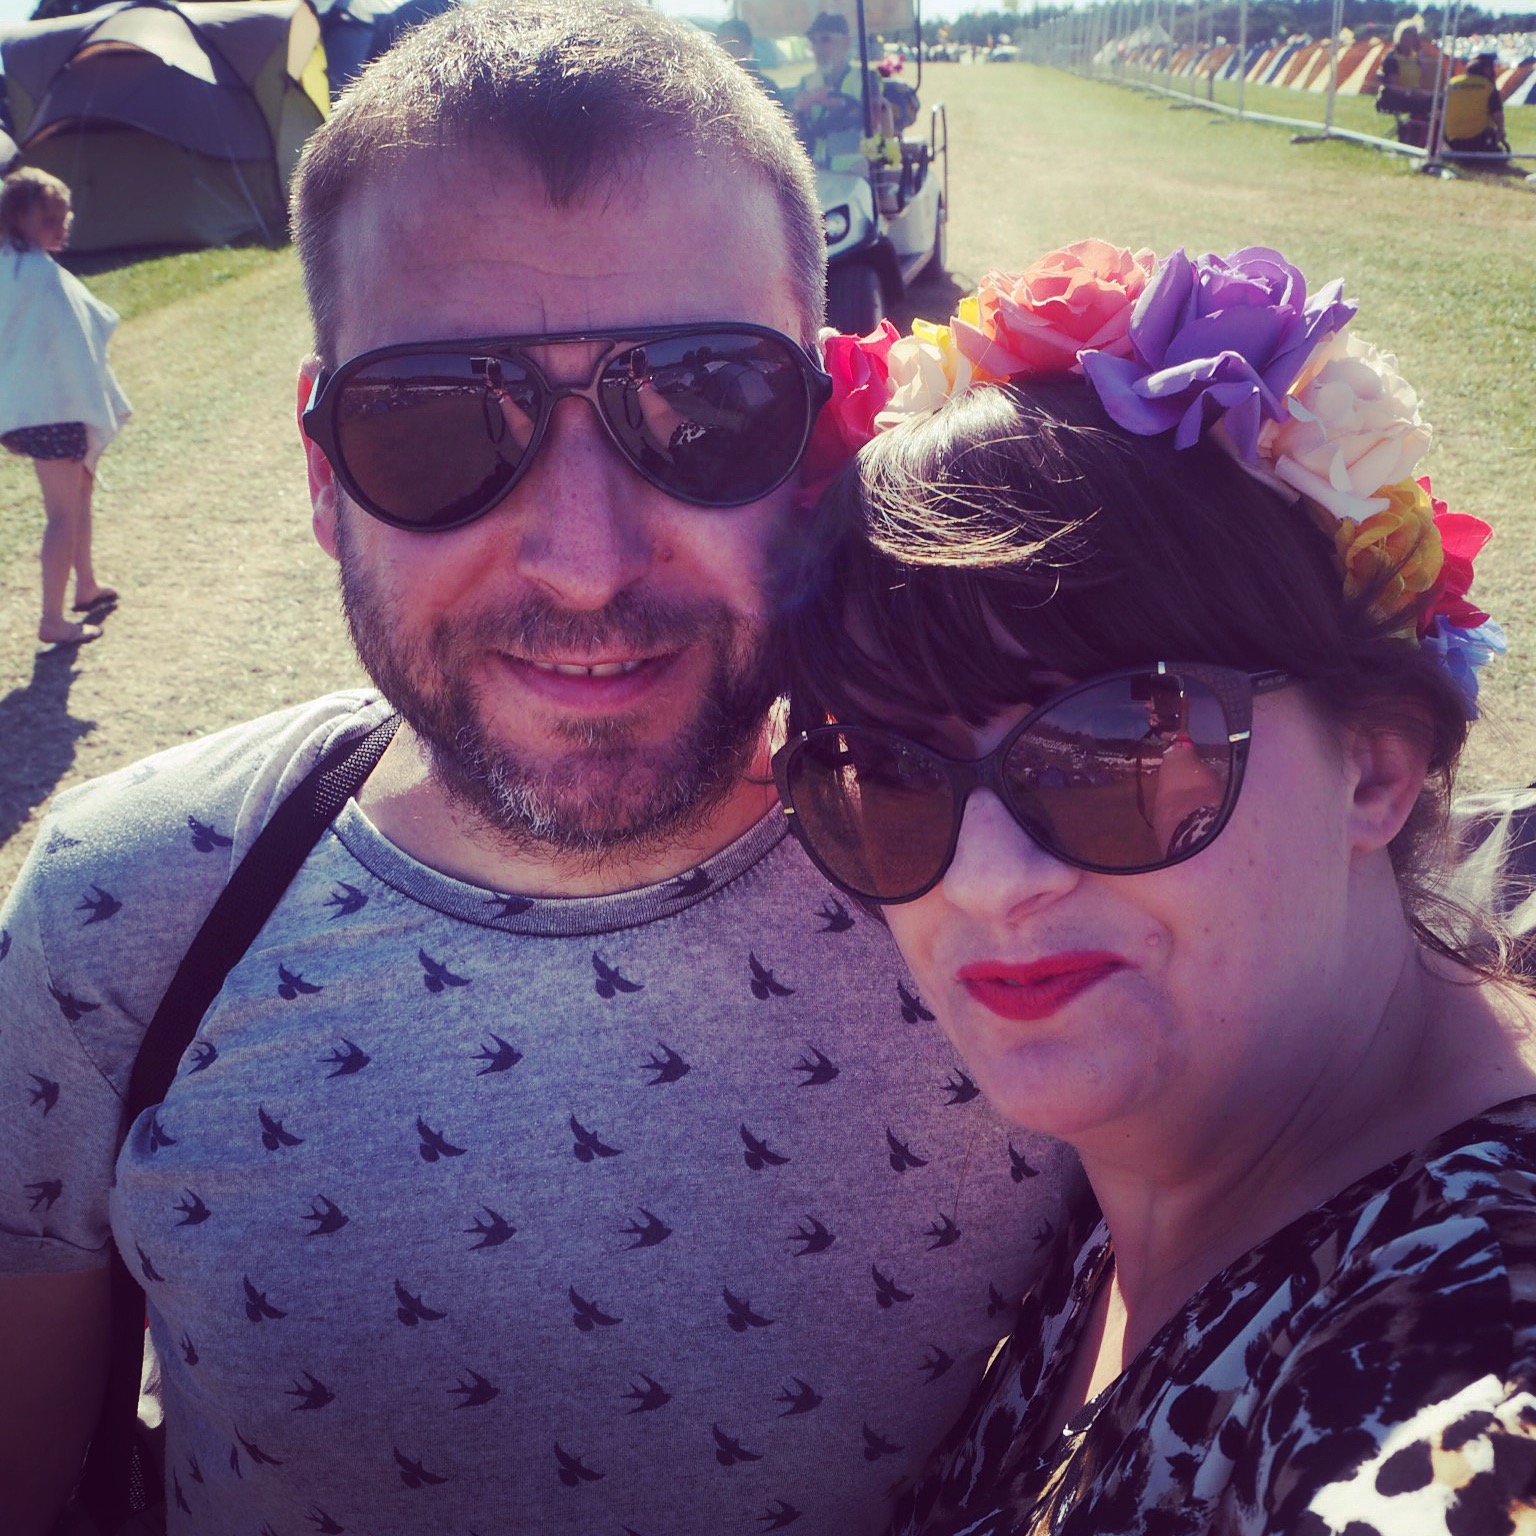 mamasVIB | V. I. BASH: An A-Z of our first Camp Bestival - Part One | camp bestival 2015 | camp bestival review | weekend at camp bestival | festival | family festival | lulworth castle | festival weekend | devon | festival | tangerine fields | cocktails | instgram | a-z | a-z of festivals | festival style | mamasVIB | bonita turner| stylist | packing for a festival | first time at a festival | festival essentials | guide to camp bestival 2015 | camp bestival | 